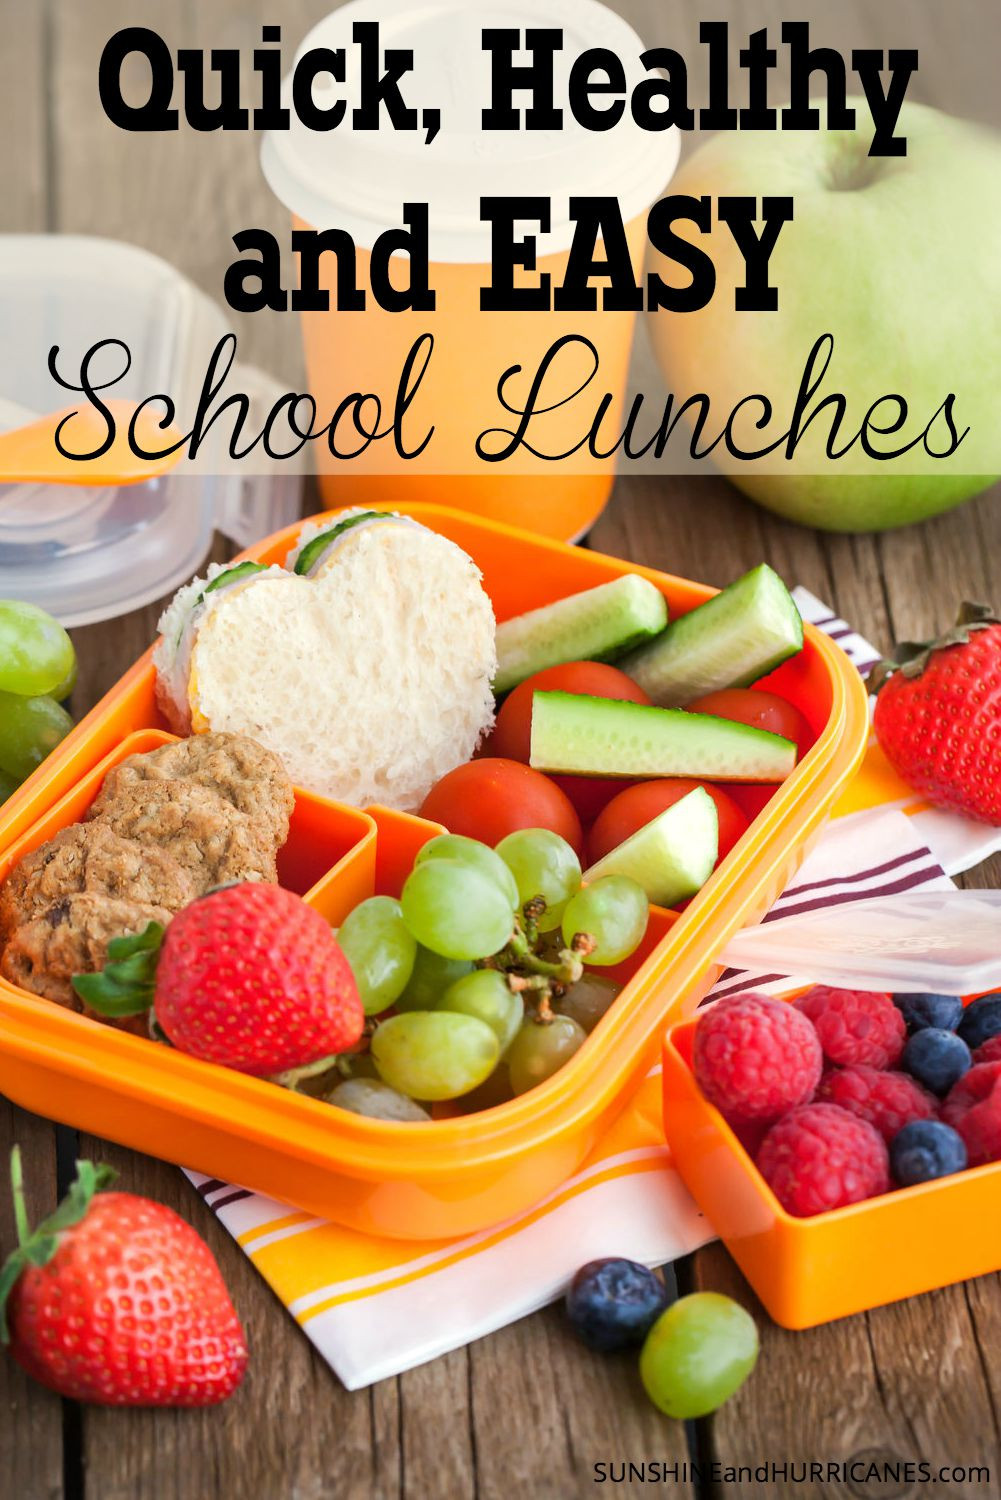 Easy Healthy Lunches For School
 Healthy Quick and Easy School Lunches